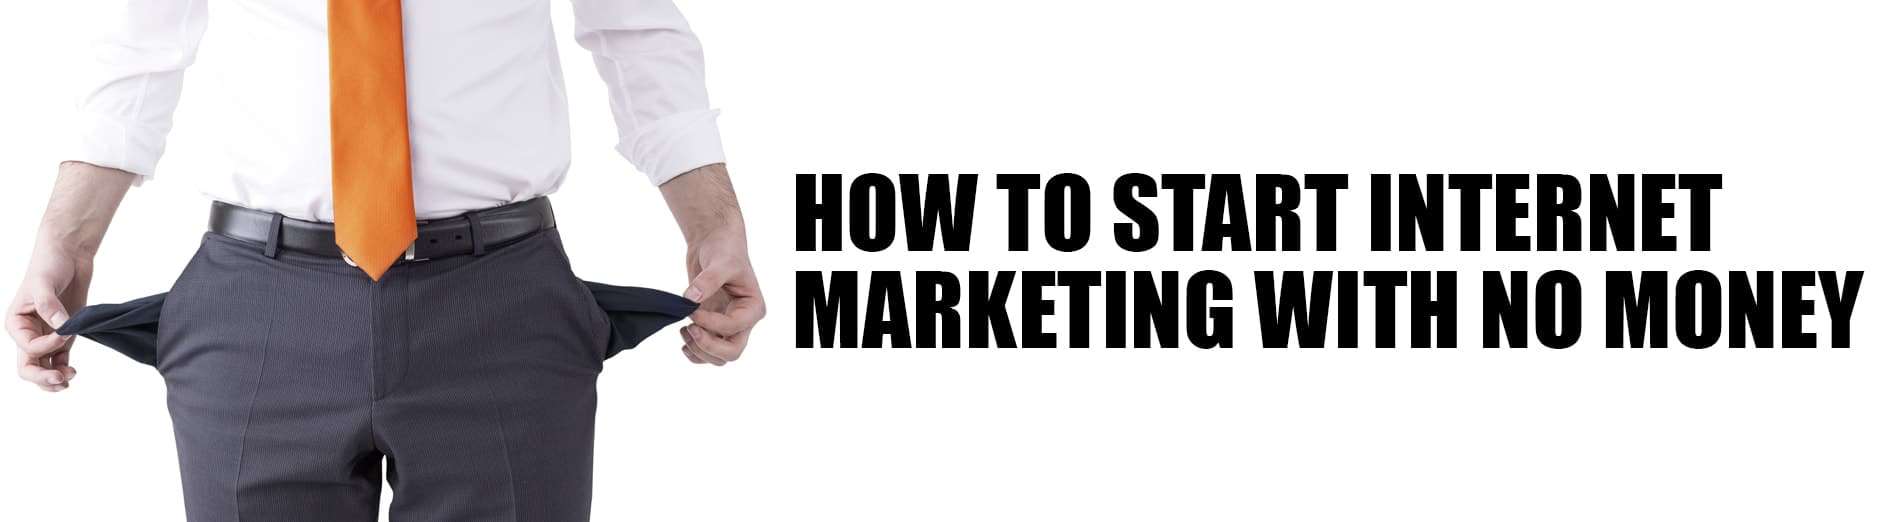 How To Start Internet Marketing With No Money